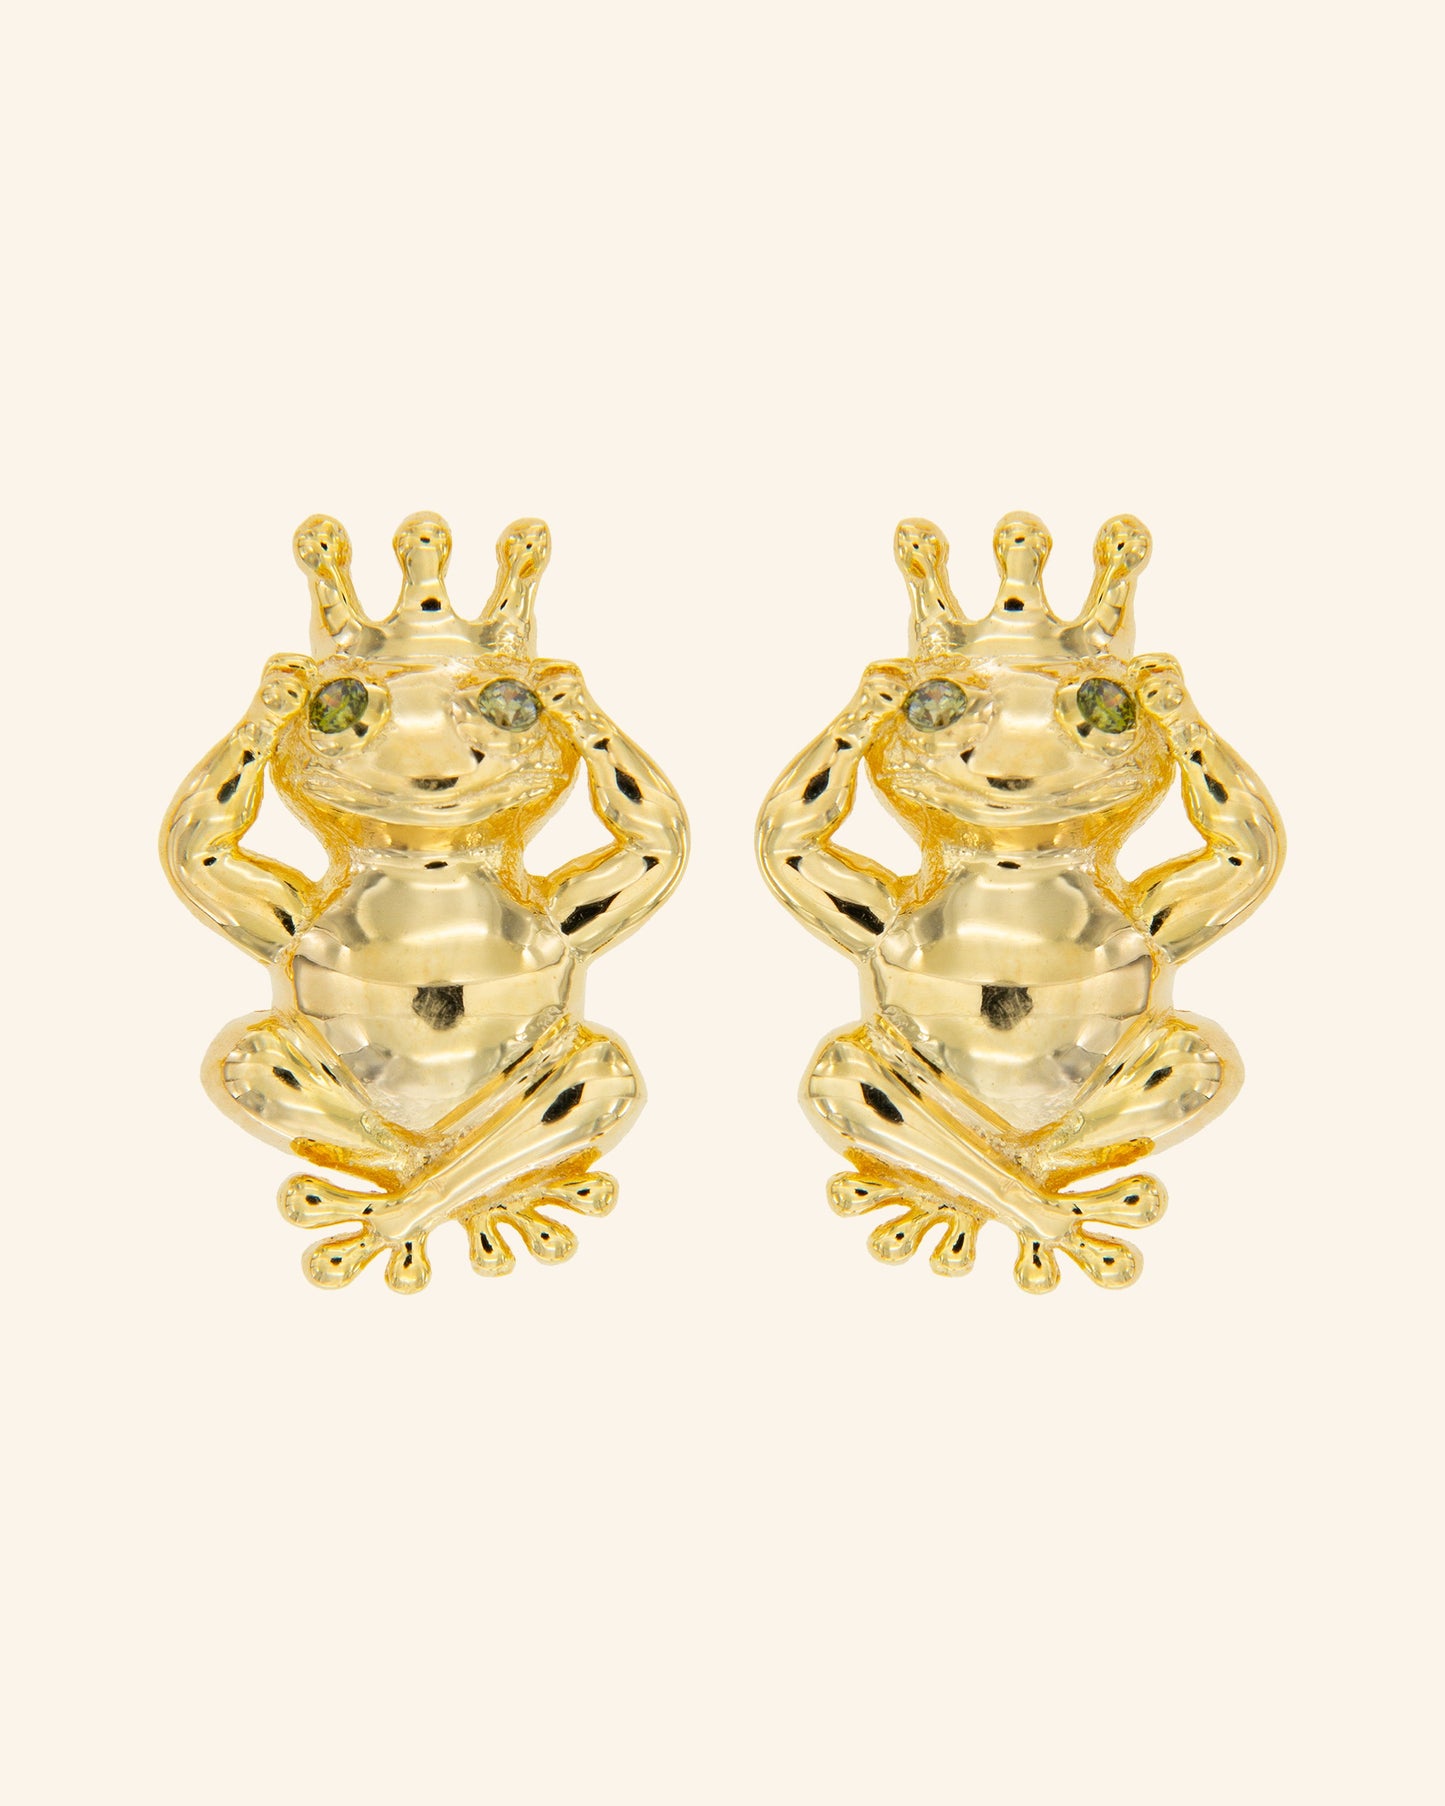 Frog Prince earrings with peridots